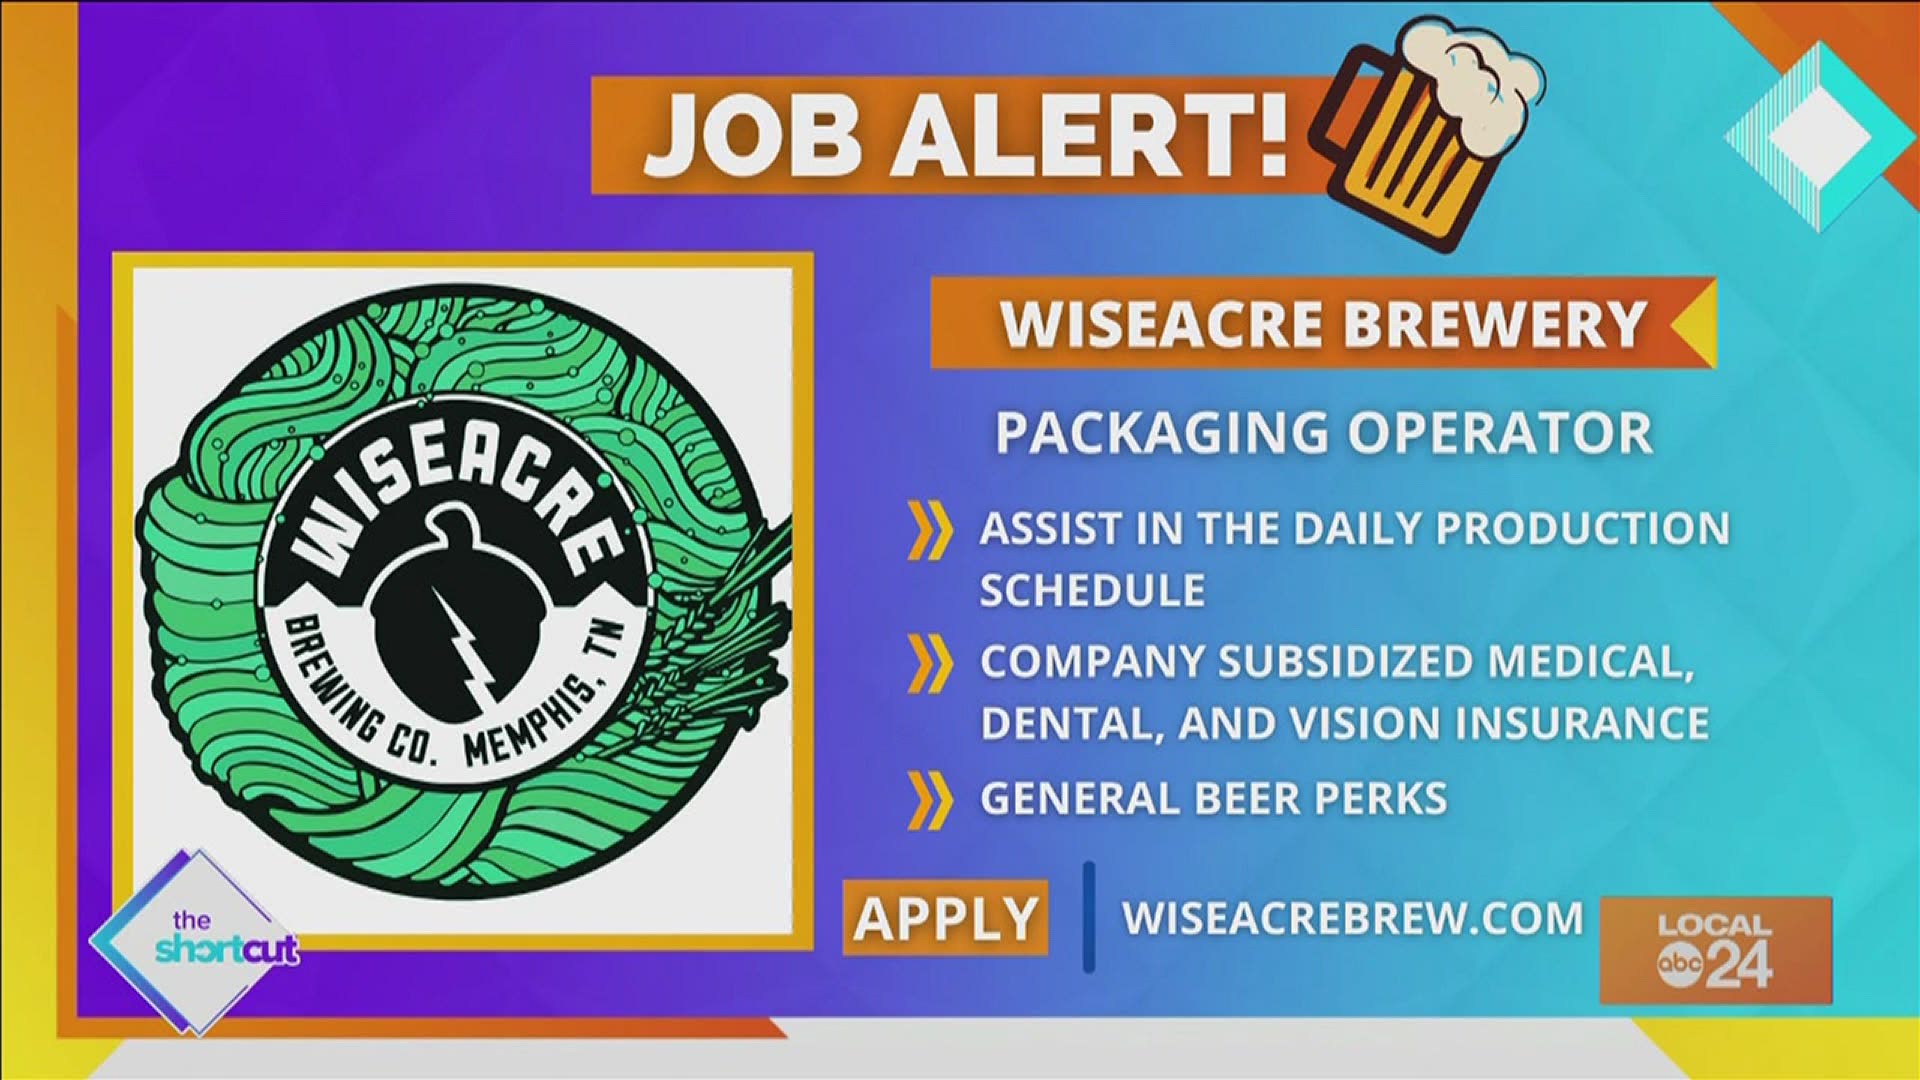 Love Wiseacre Brewery beer? Then apply to become a packaging operator! Medical, dental, and vision insurance included, followed by paid time off and beer perks!